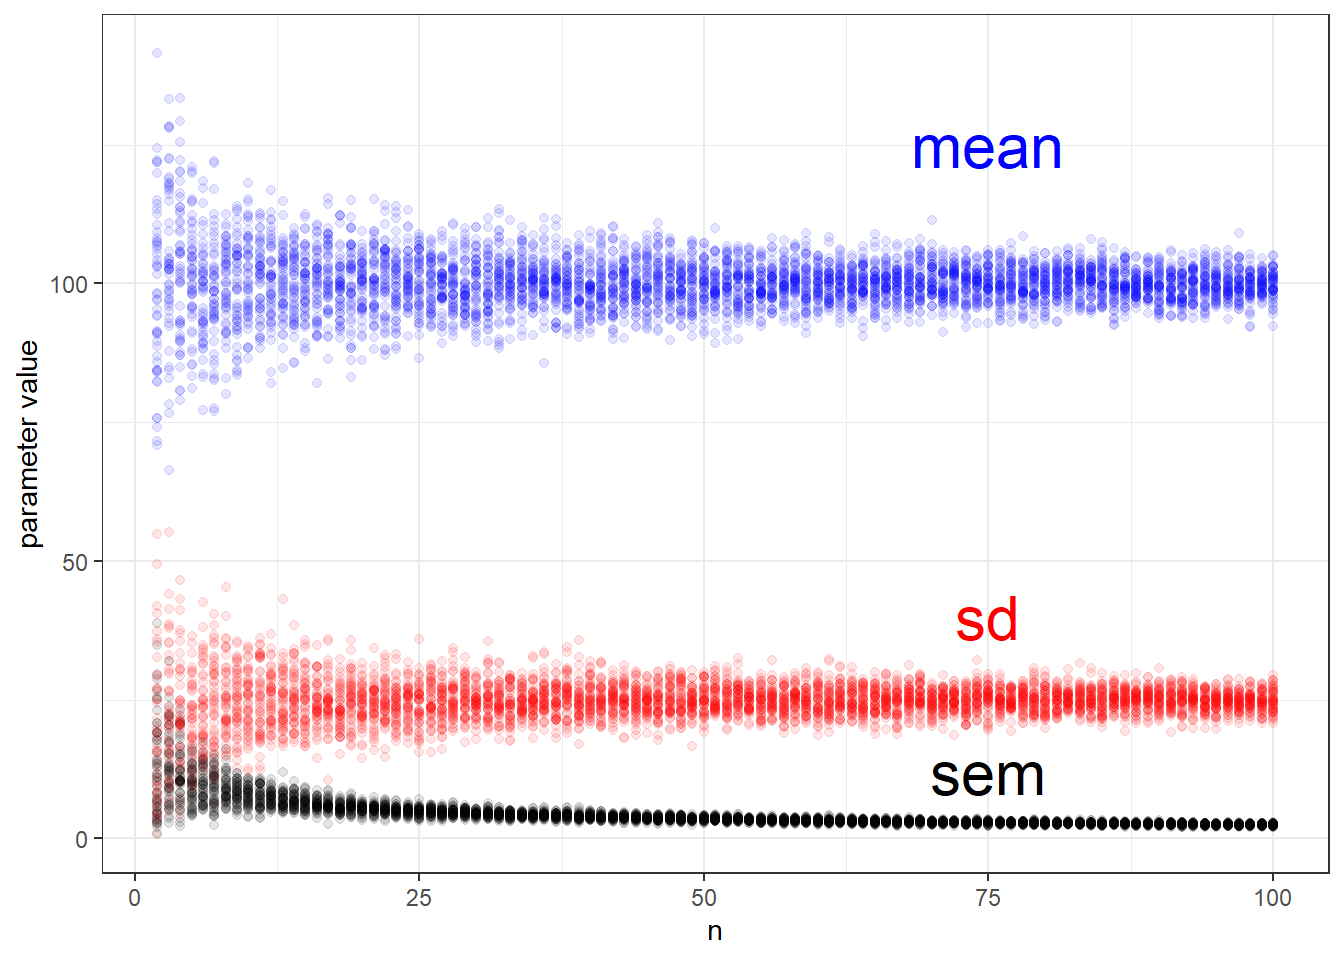 Simulation of the relationships between the sample parameters used in t-tests. These can represent either group parameters or the parameters for the difference between groups.